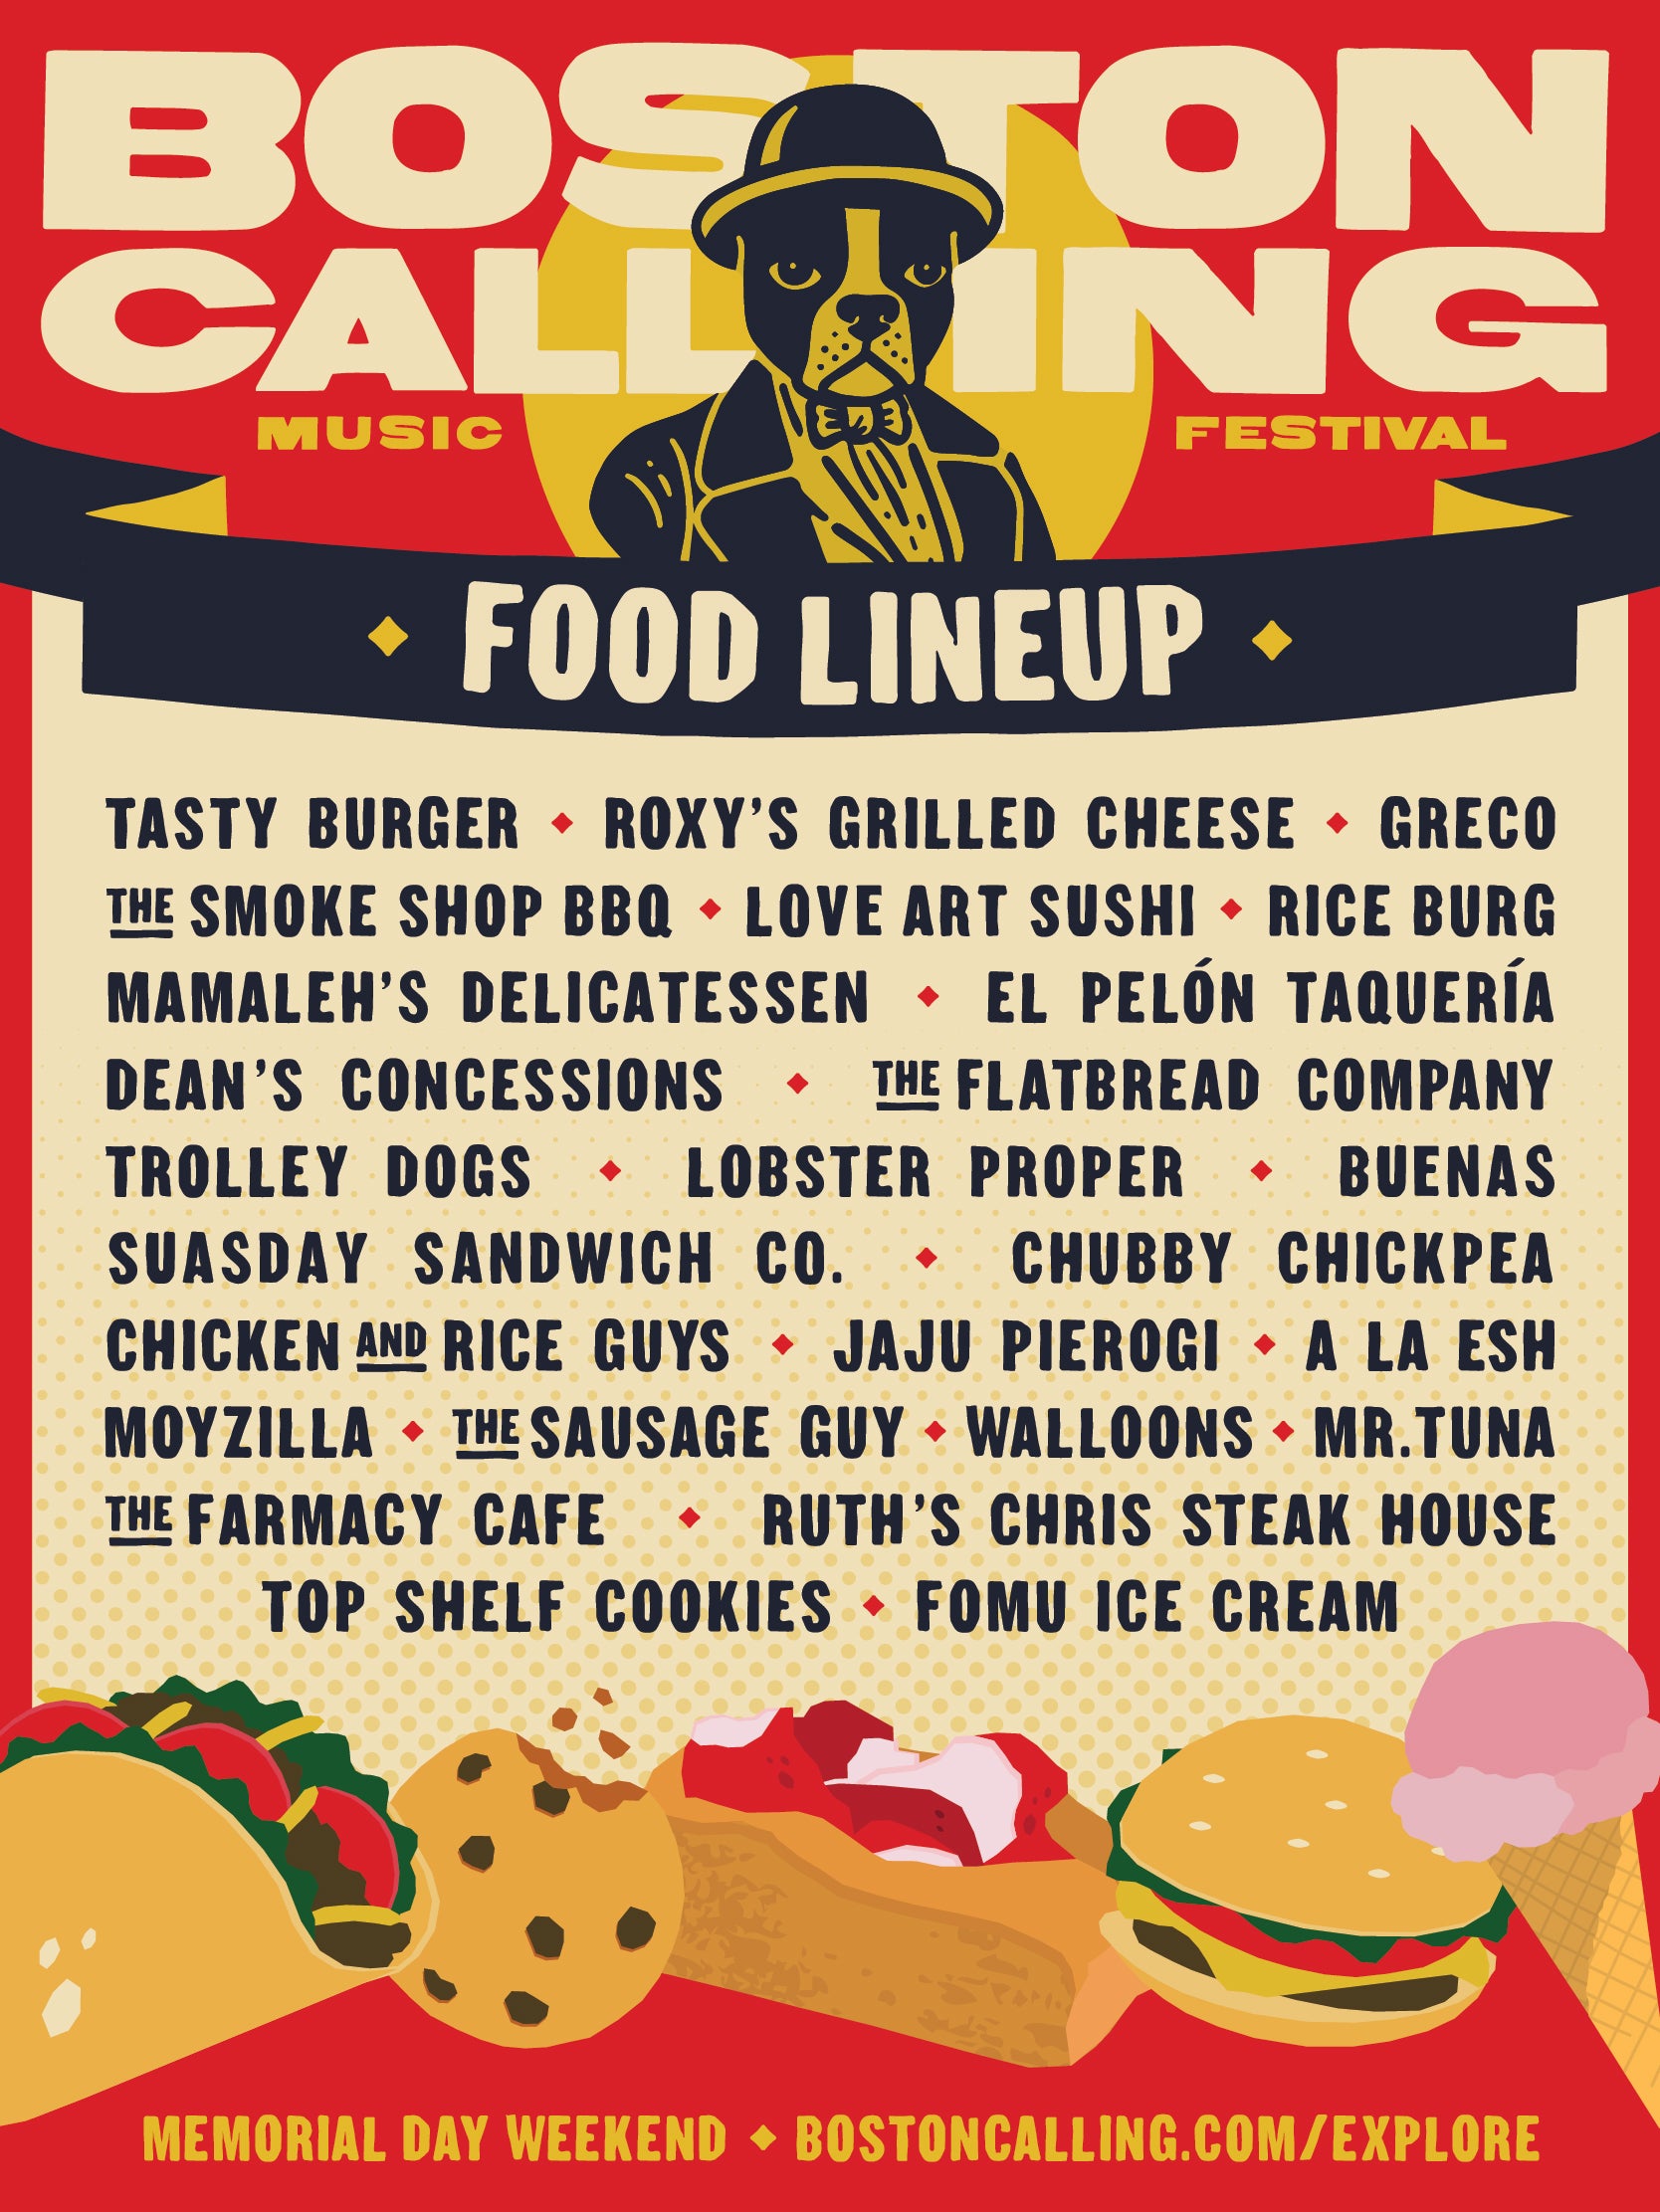 The Boston Calling 2022 line of food and beverages.